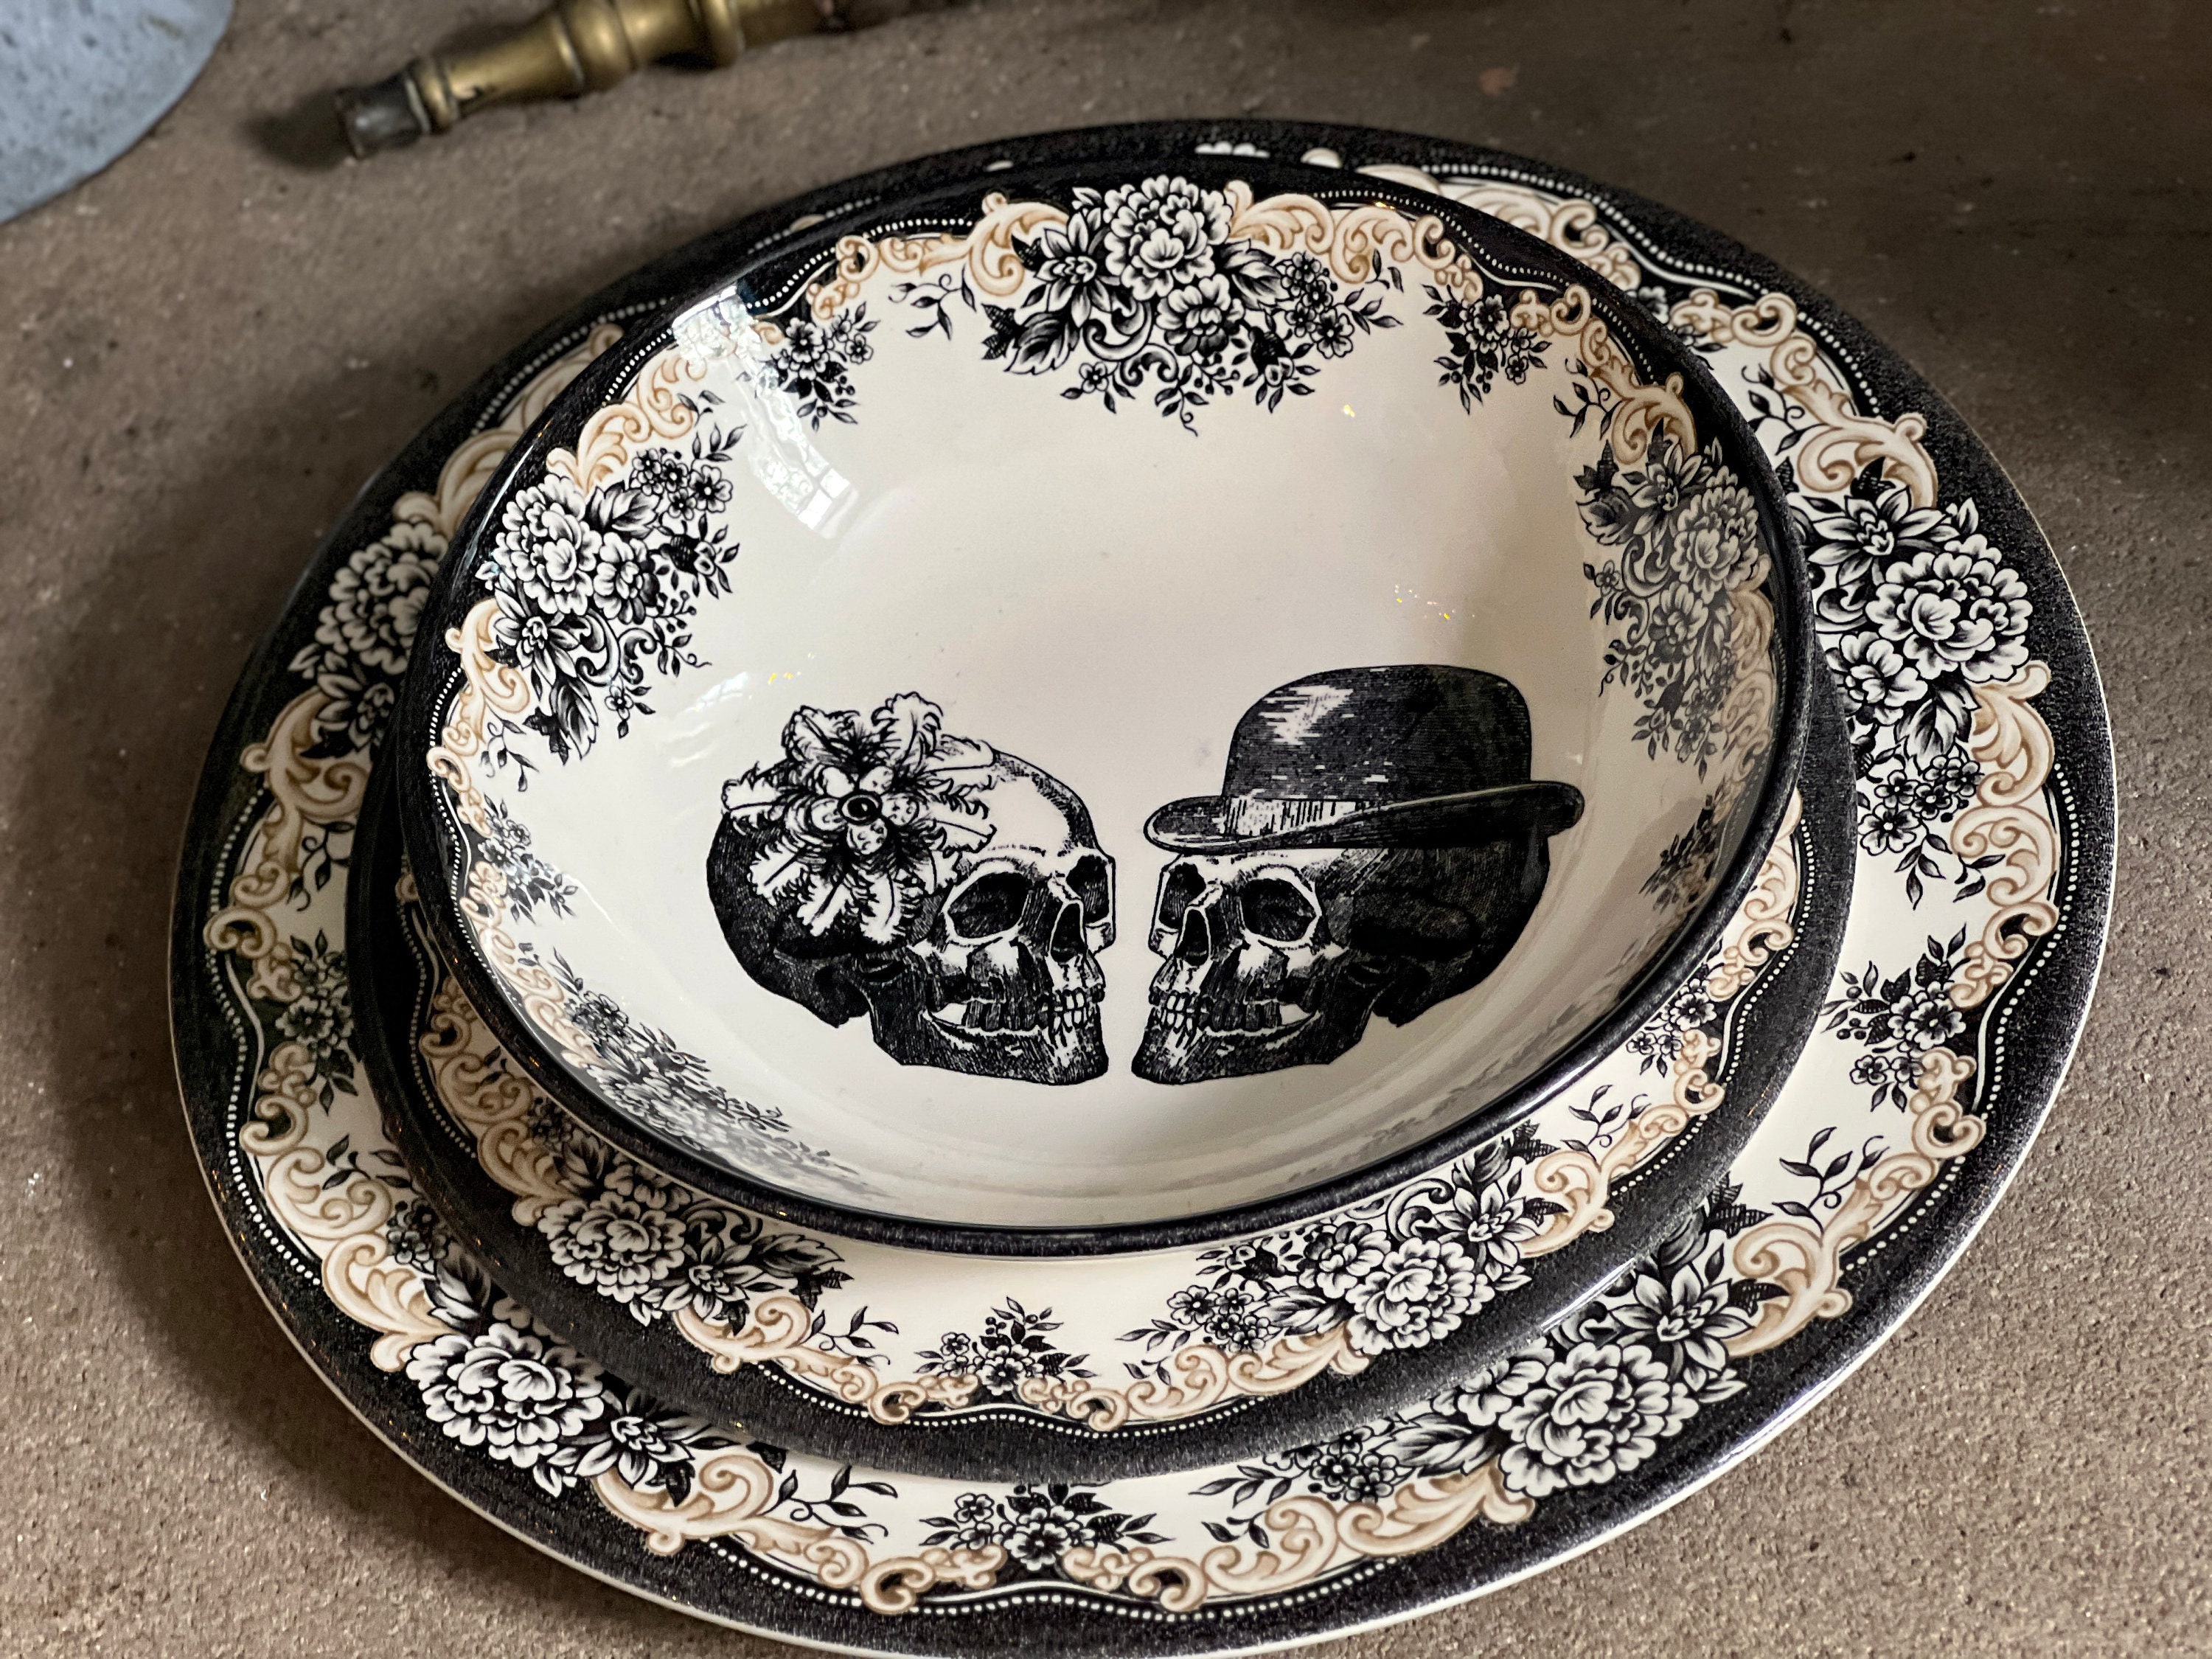 Heavy Duty Black Plastic Plates With Silvery Lace Design - 15 Dinner Plates  And 15 Dessert Plates - Perfect For Parties, Day Of The Dead, Halloween,  And Graduation - Unique And Unusual